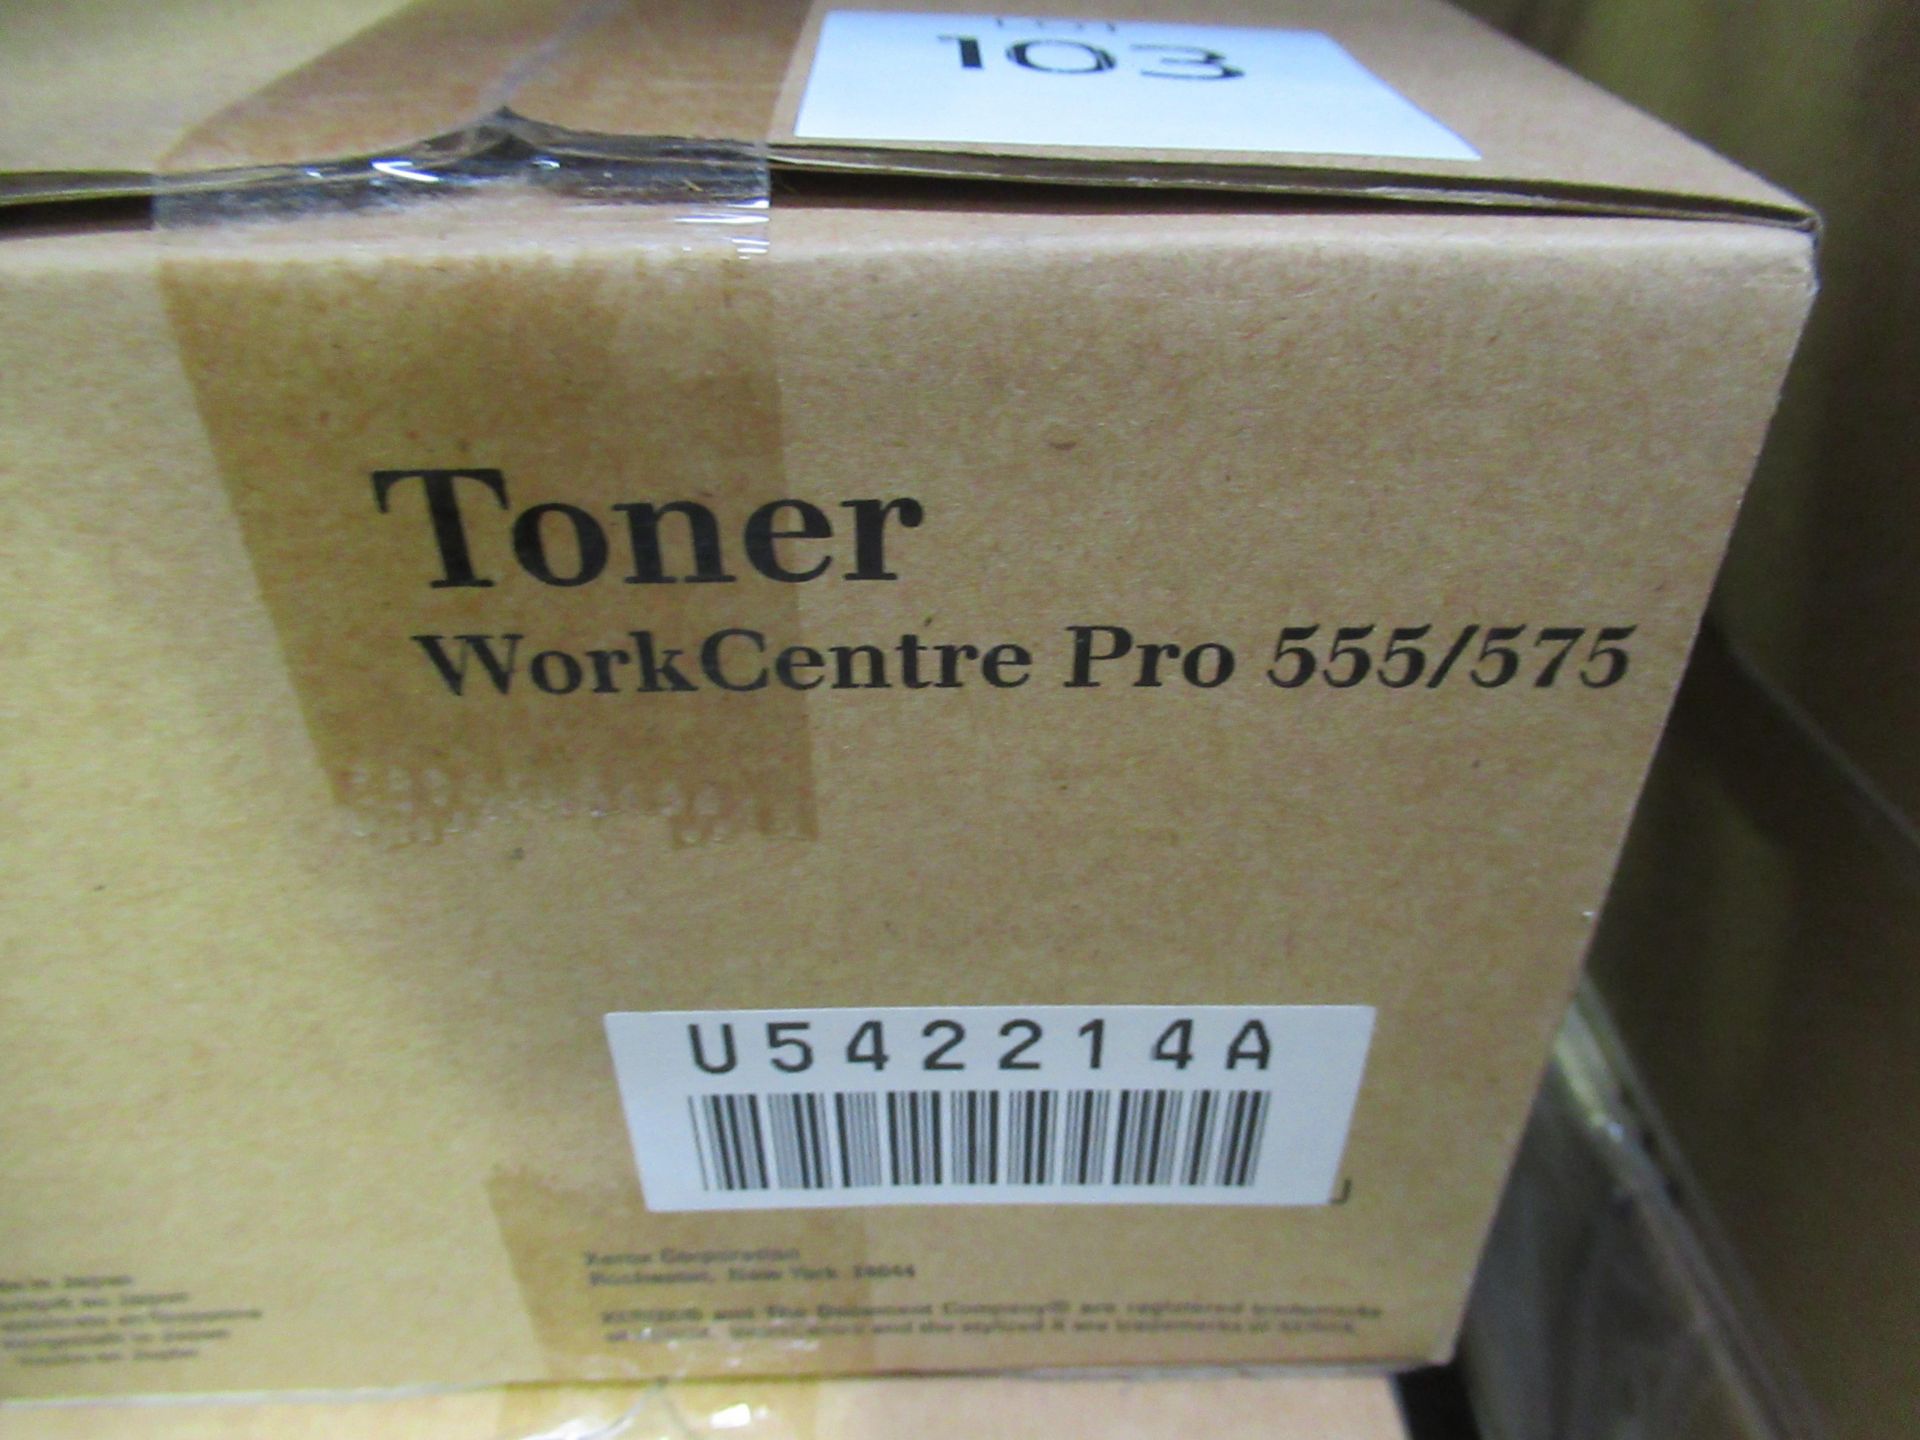 2x Xerox toner cartridges for work centre Pro 555/575 - Image 2 of 2